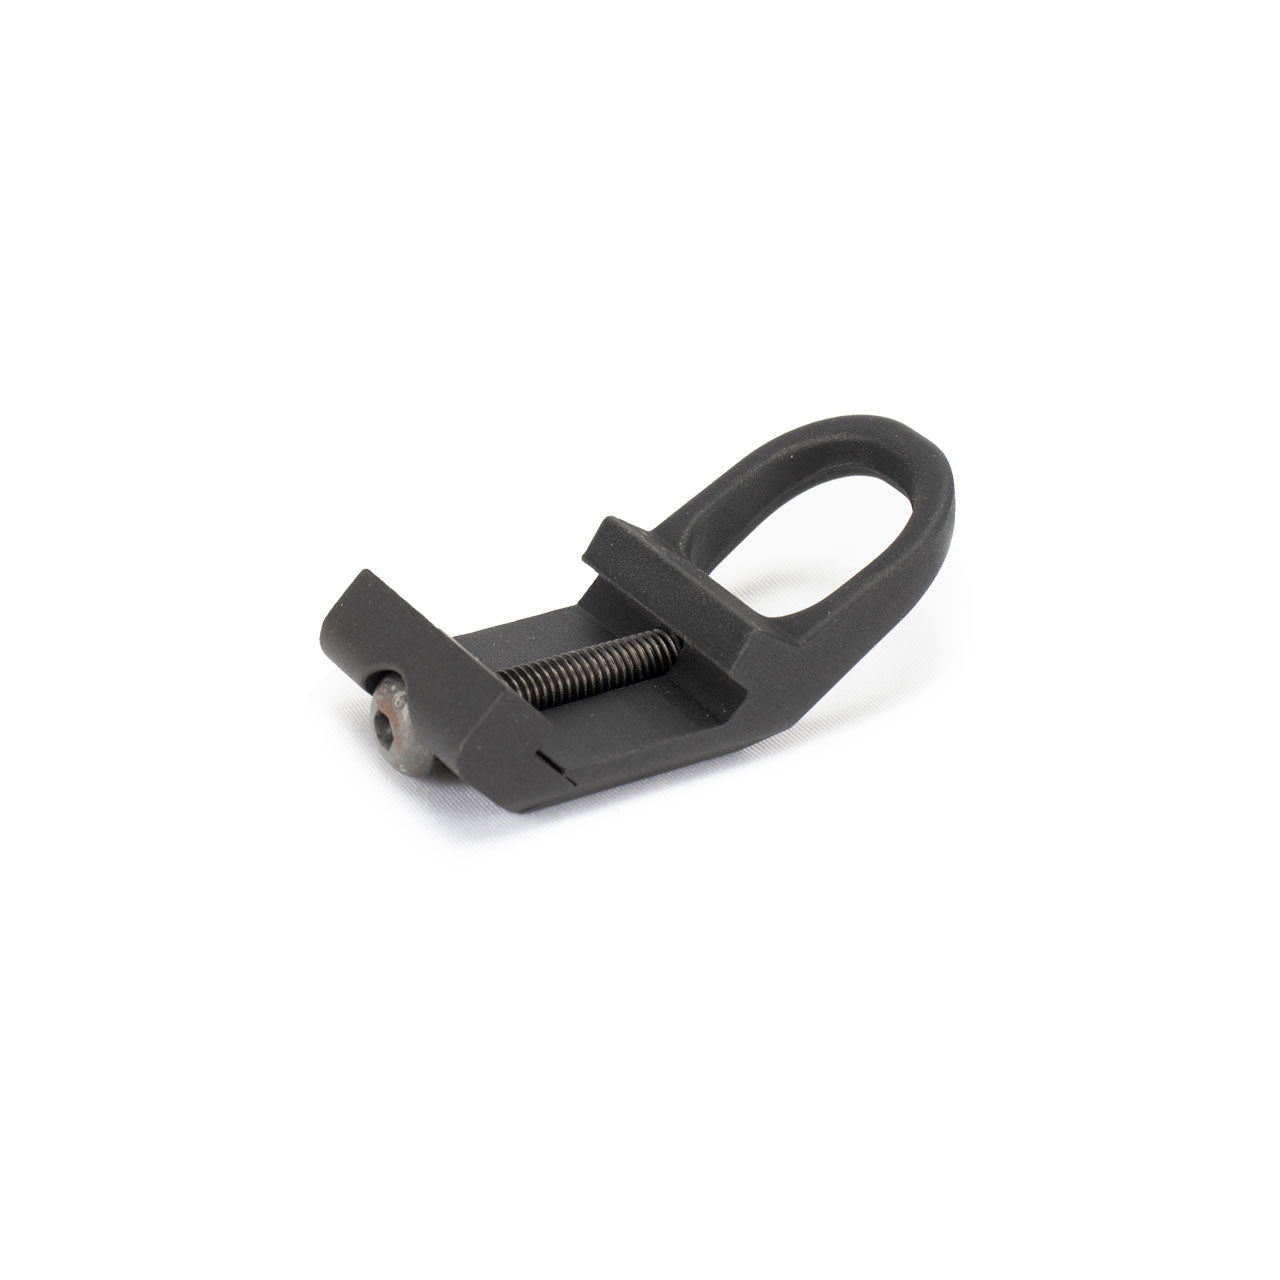 Airsoft Low Profile Rail Mount Sling Adapter 20mm